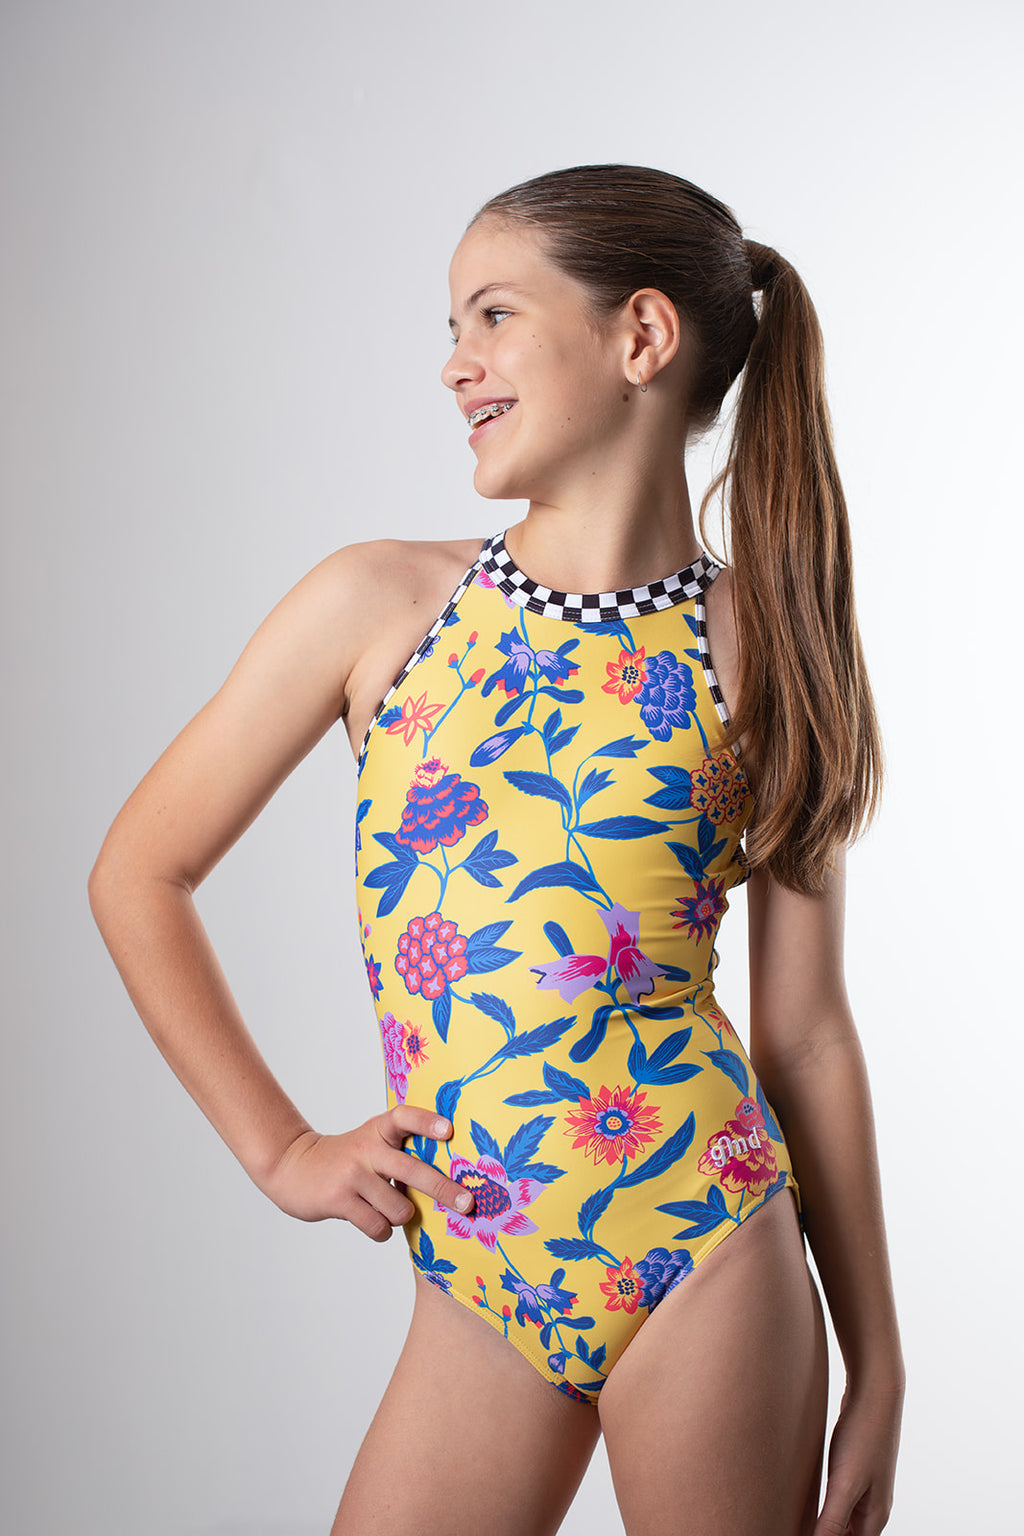 Girl standing infront of a pink backdrop, wearing a yellow floral gymnastics leotard. The back of the leotard features black & white checkered criss cross strap details for contrast.